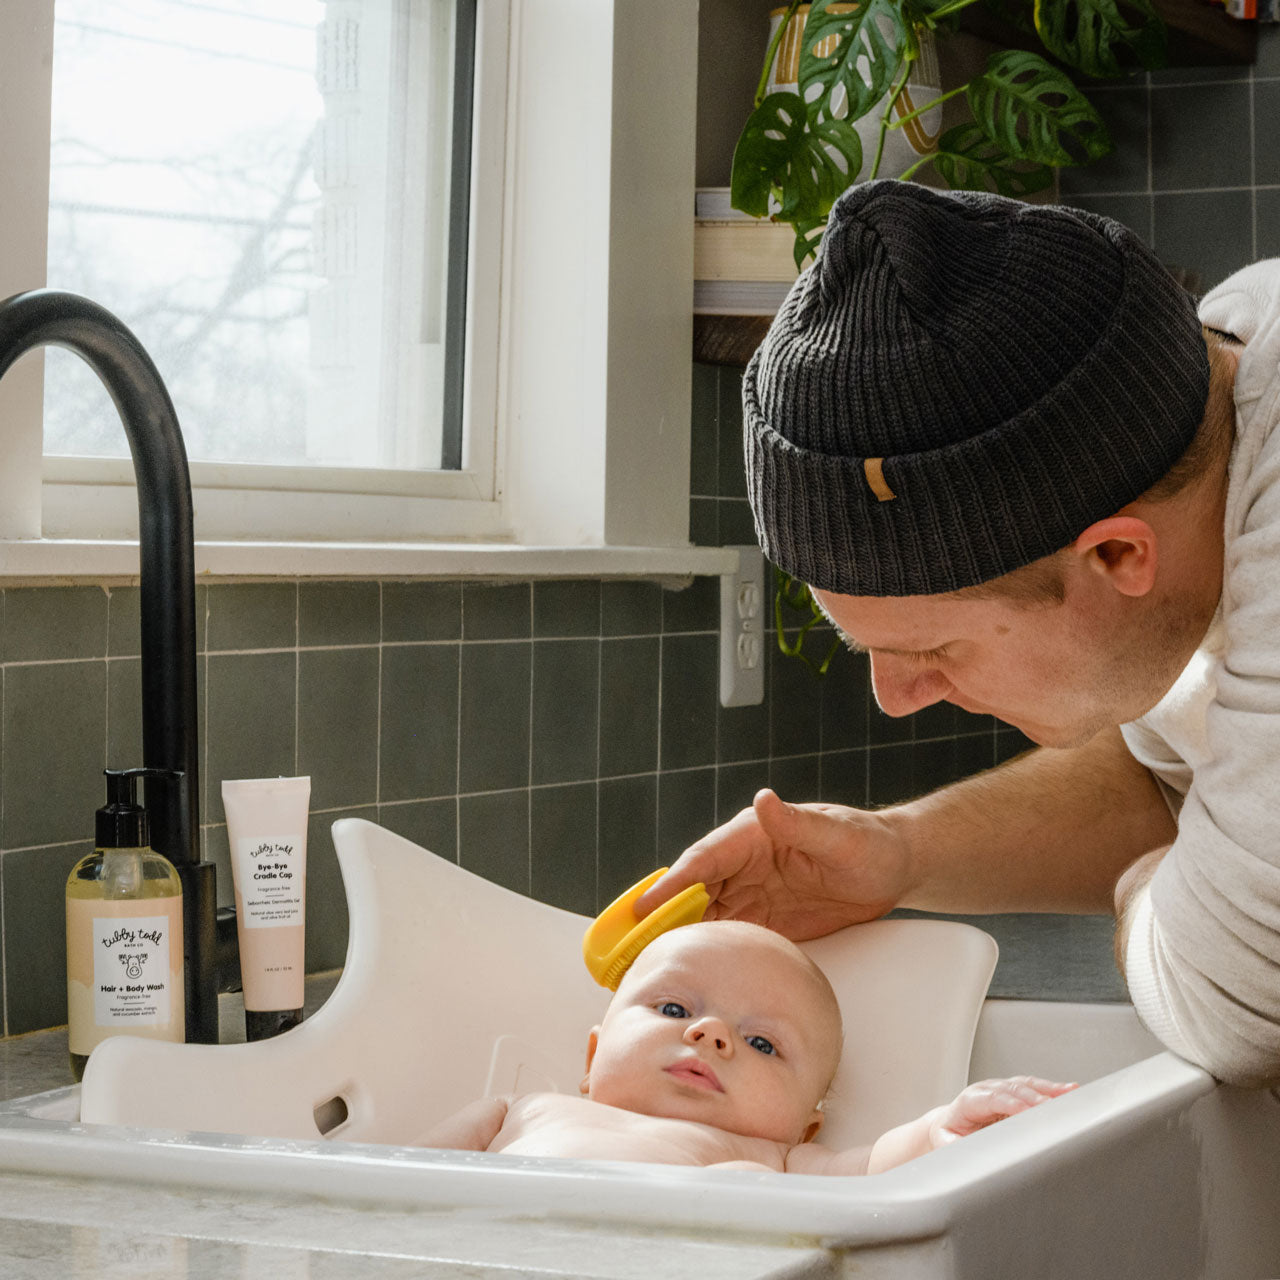 Dad washing baby's scalp with Cradle Cap Brush in sink bath